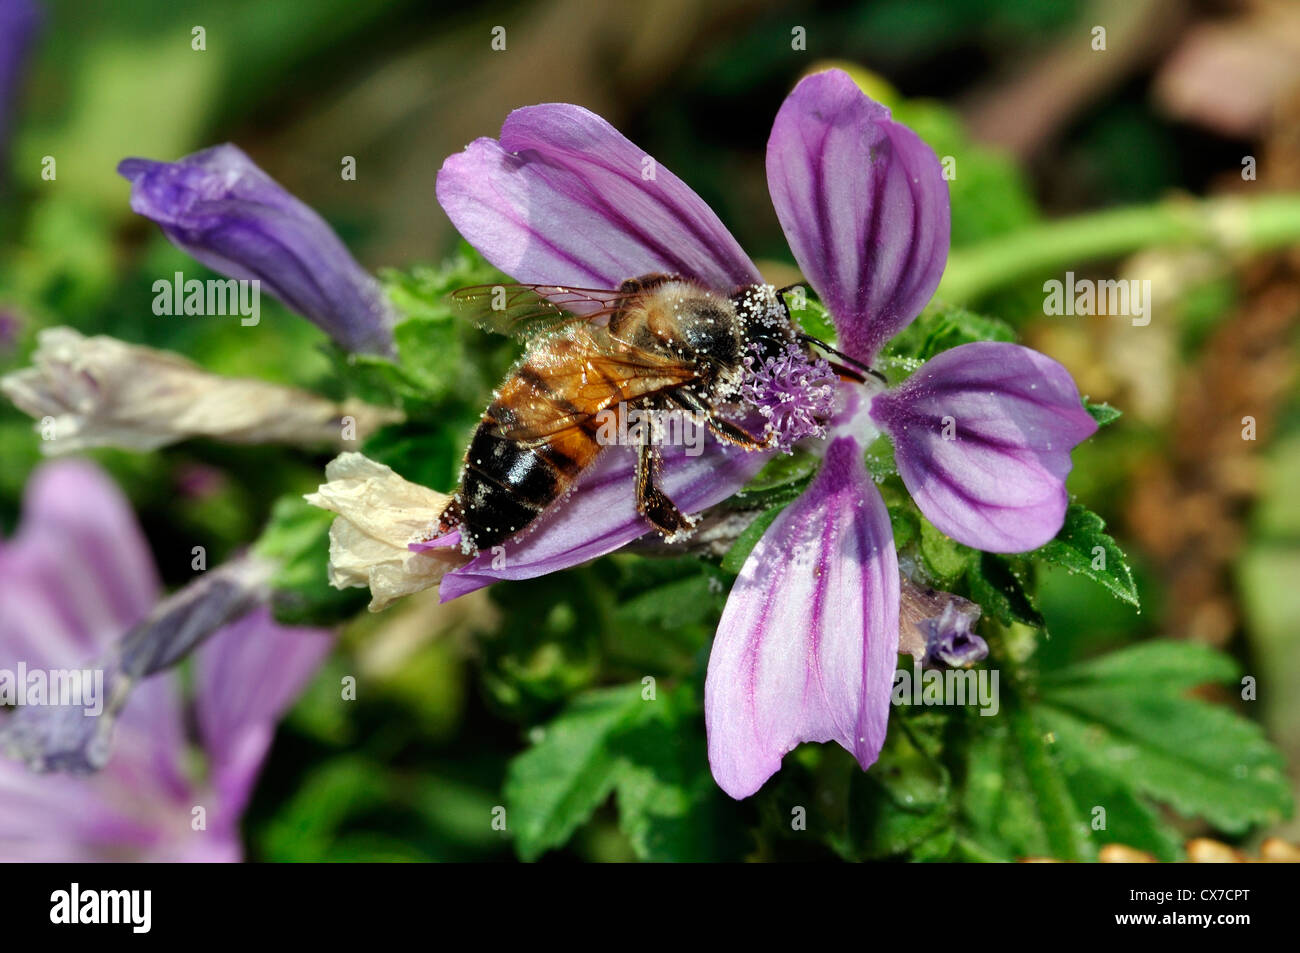 Italy, Lombardy, Bee Gathering Pollen on Mallow Flowers Stock Photo